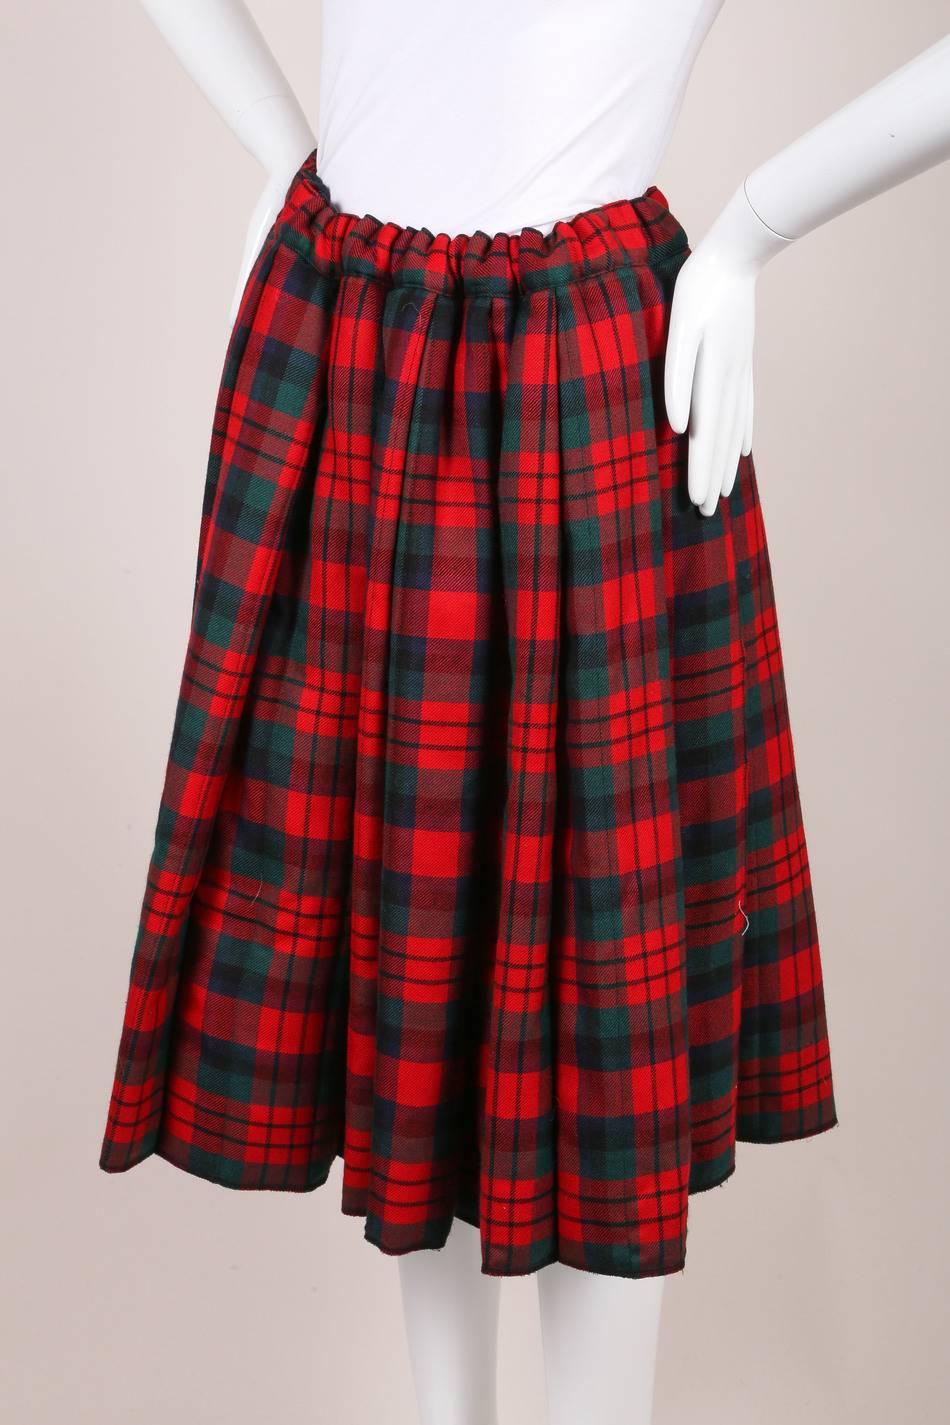 This full, plaid pattern skirt is constructed of wool and pleated throughout. Hits around the knees. Padded. Top drawstring closure. Lined.

